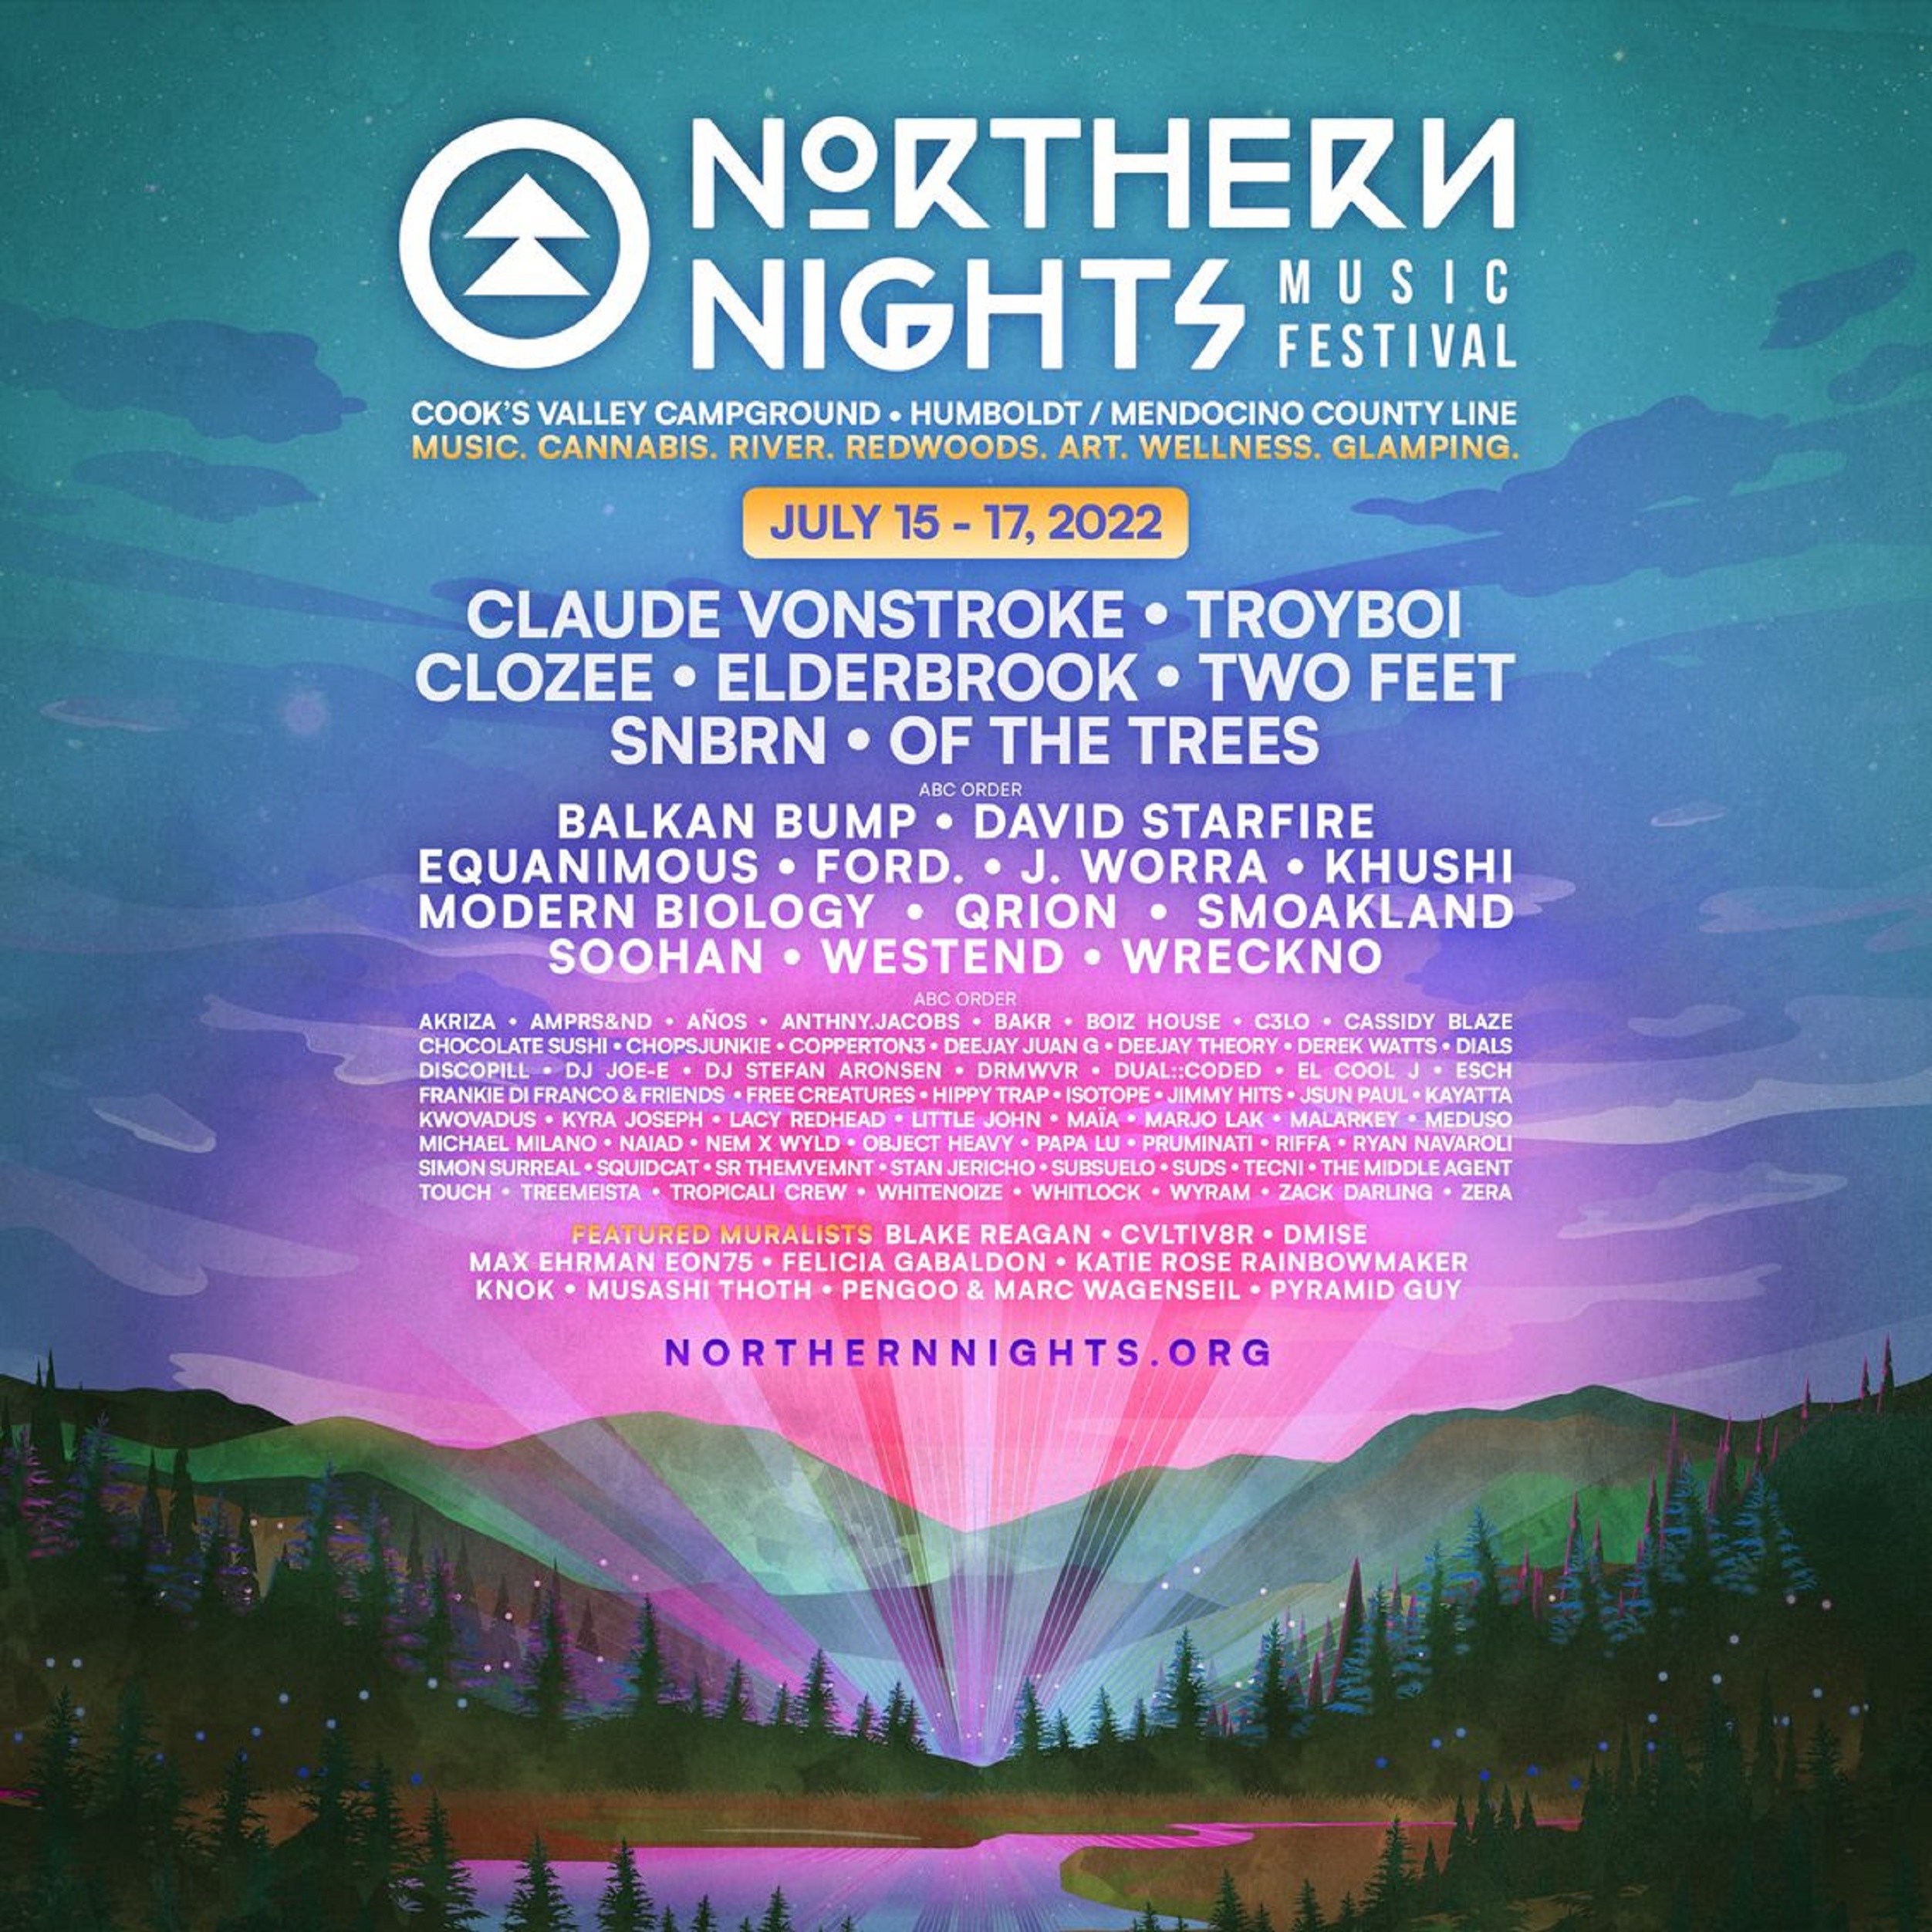 Northern Nights Music Festival Announces Phase Two Music Lineup for 2022